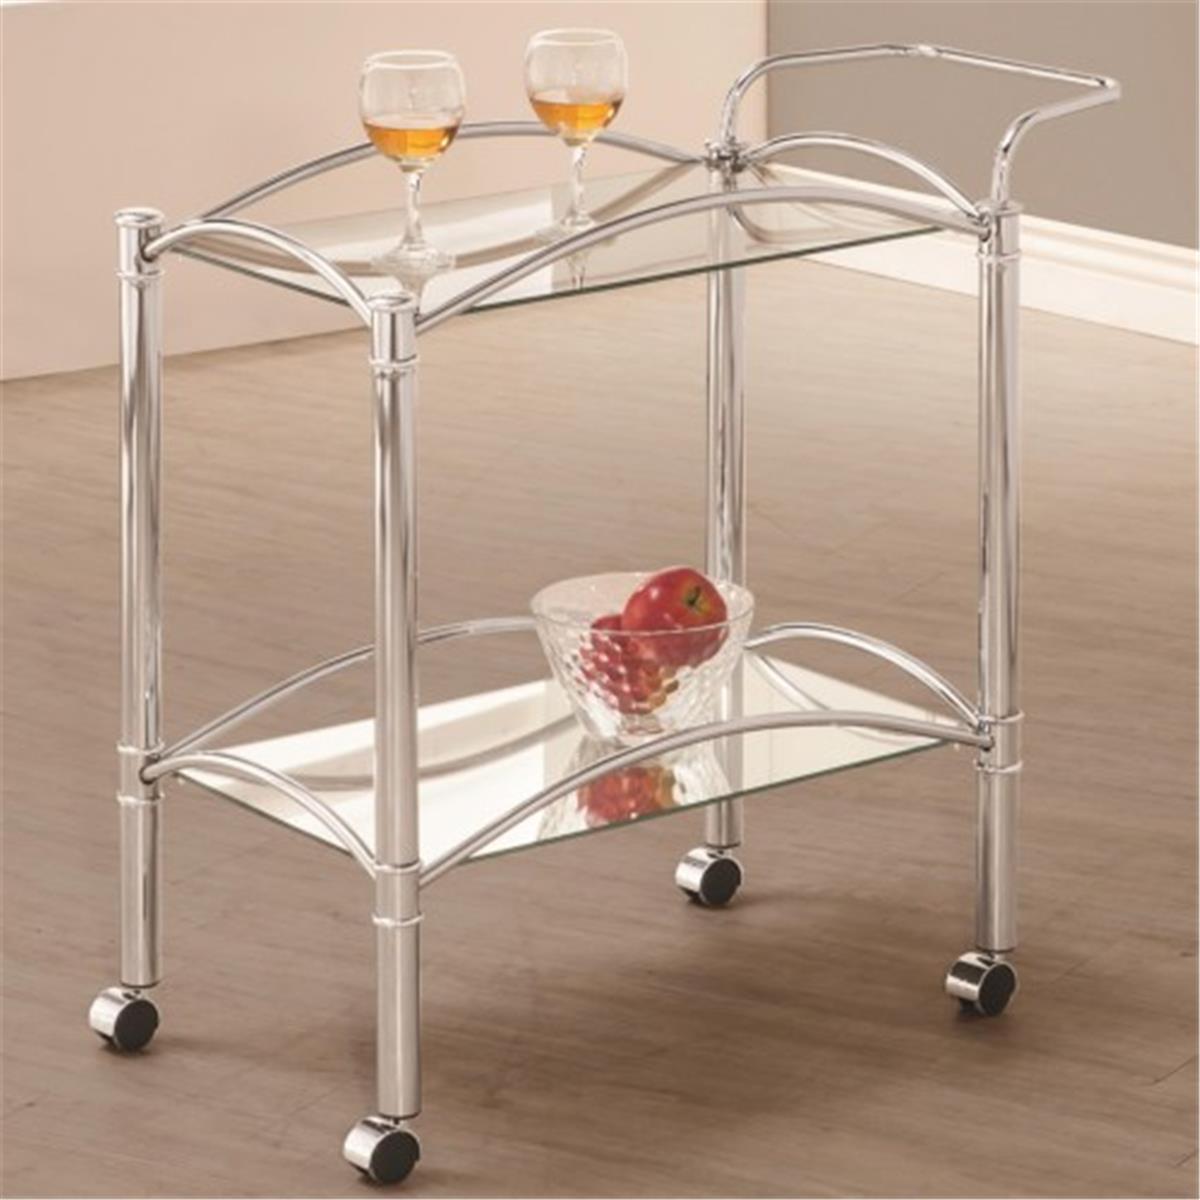 Picture of Coaster 910077 Serving Cart with Mirrored Bottom Shelf & Casters - Chrome